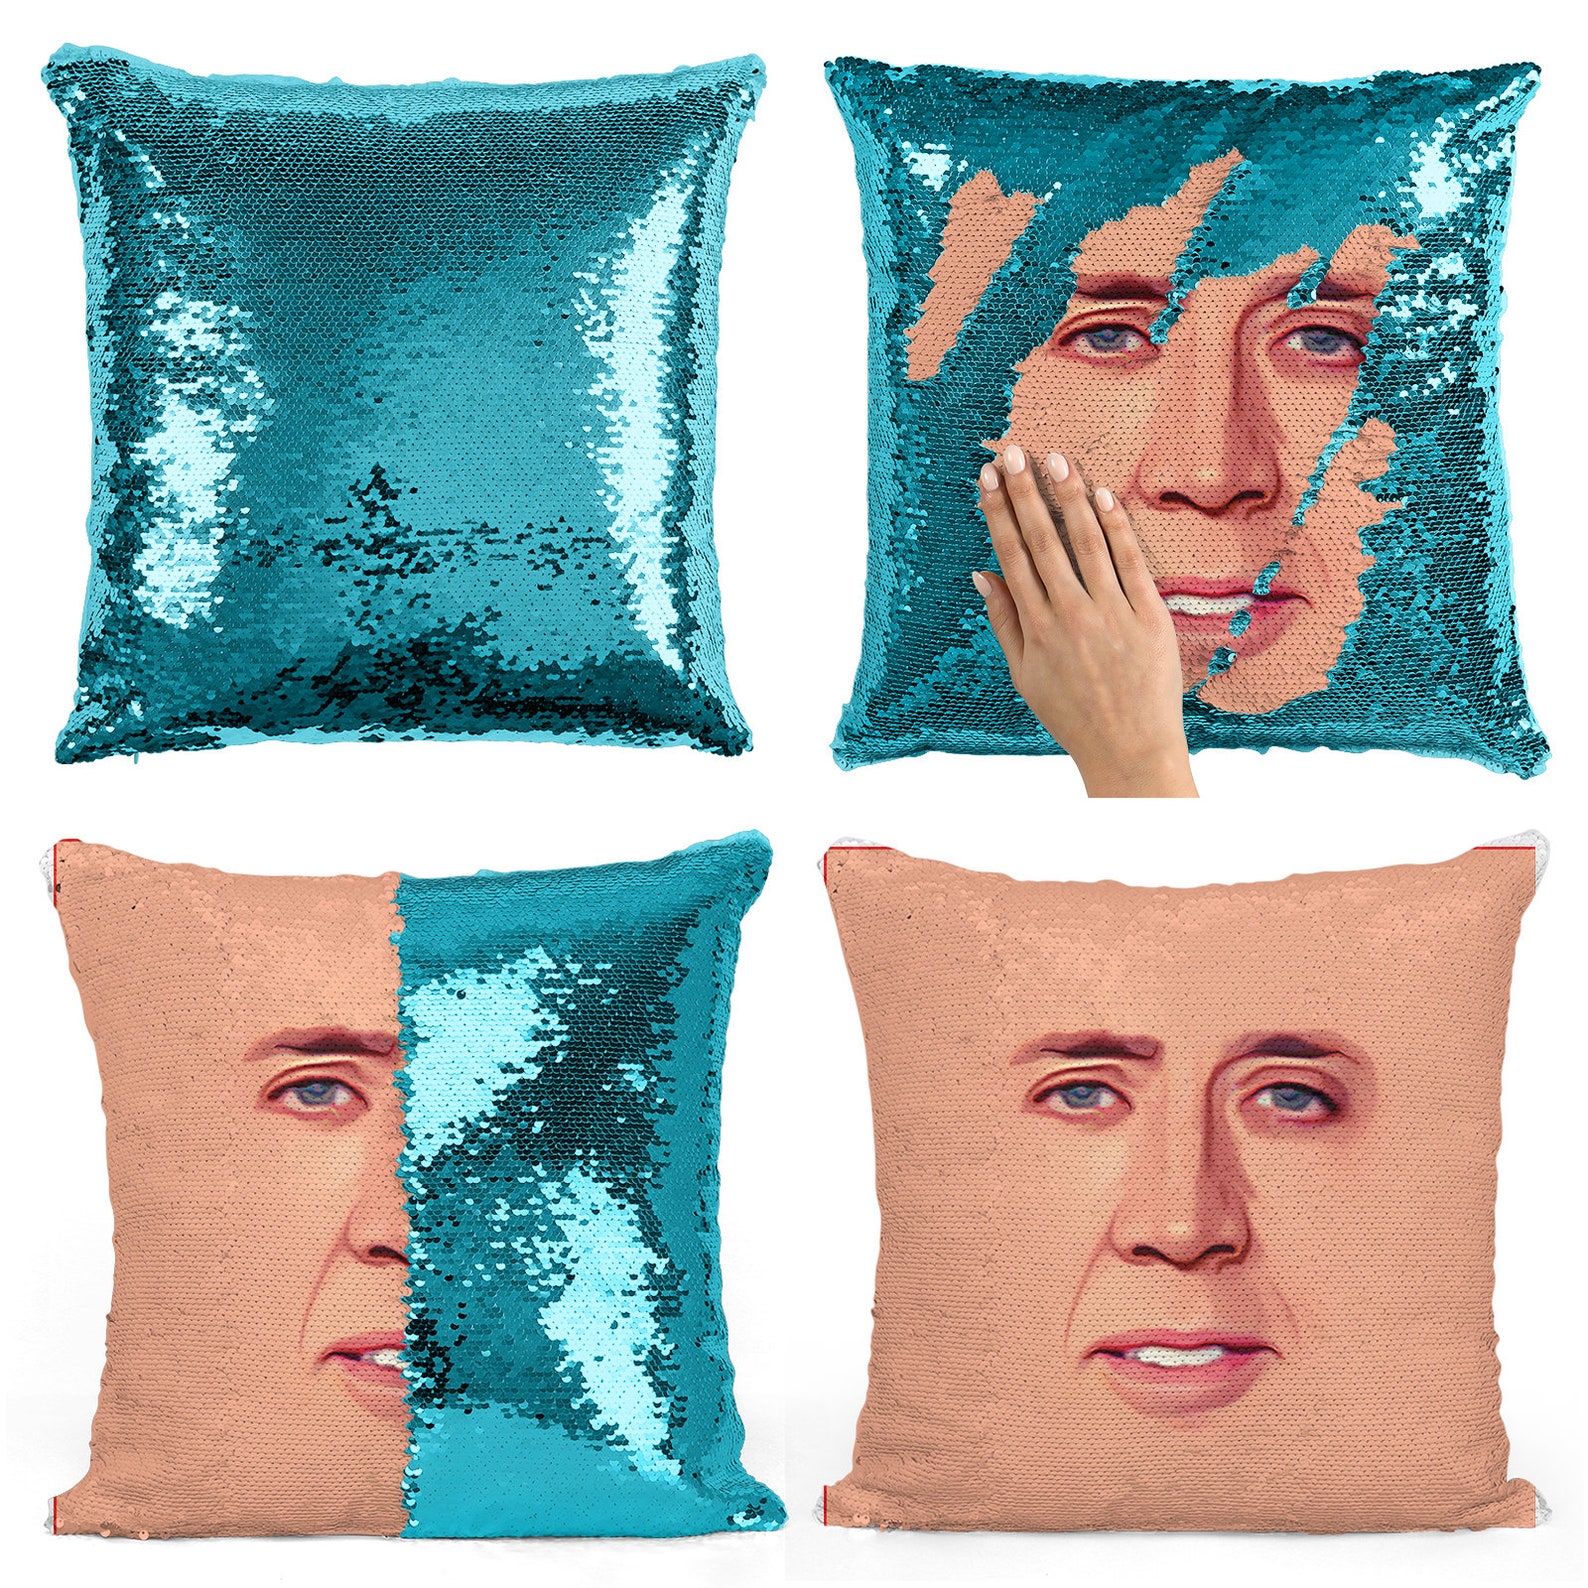 Mermaid Pillow Cover Nicolas Cage Pillow Case Funny Gag Gifts | Etsy